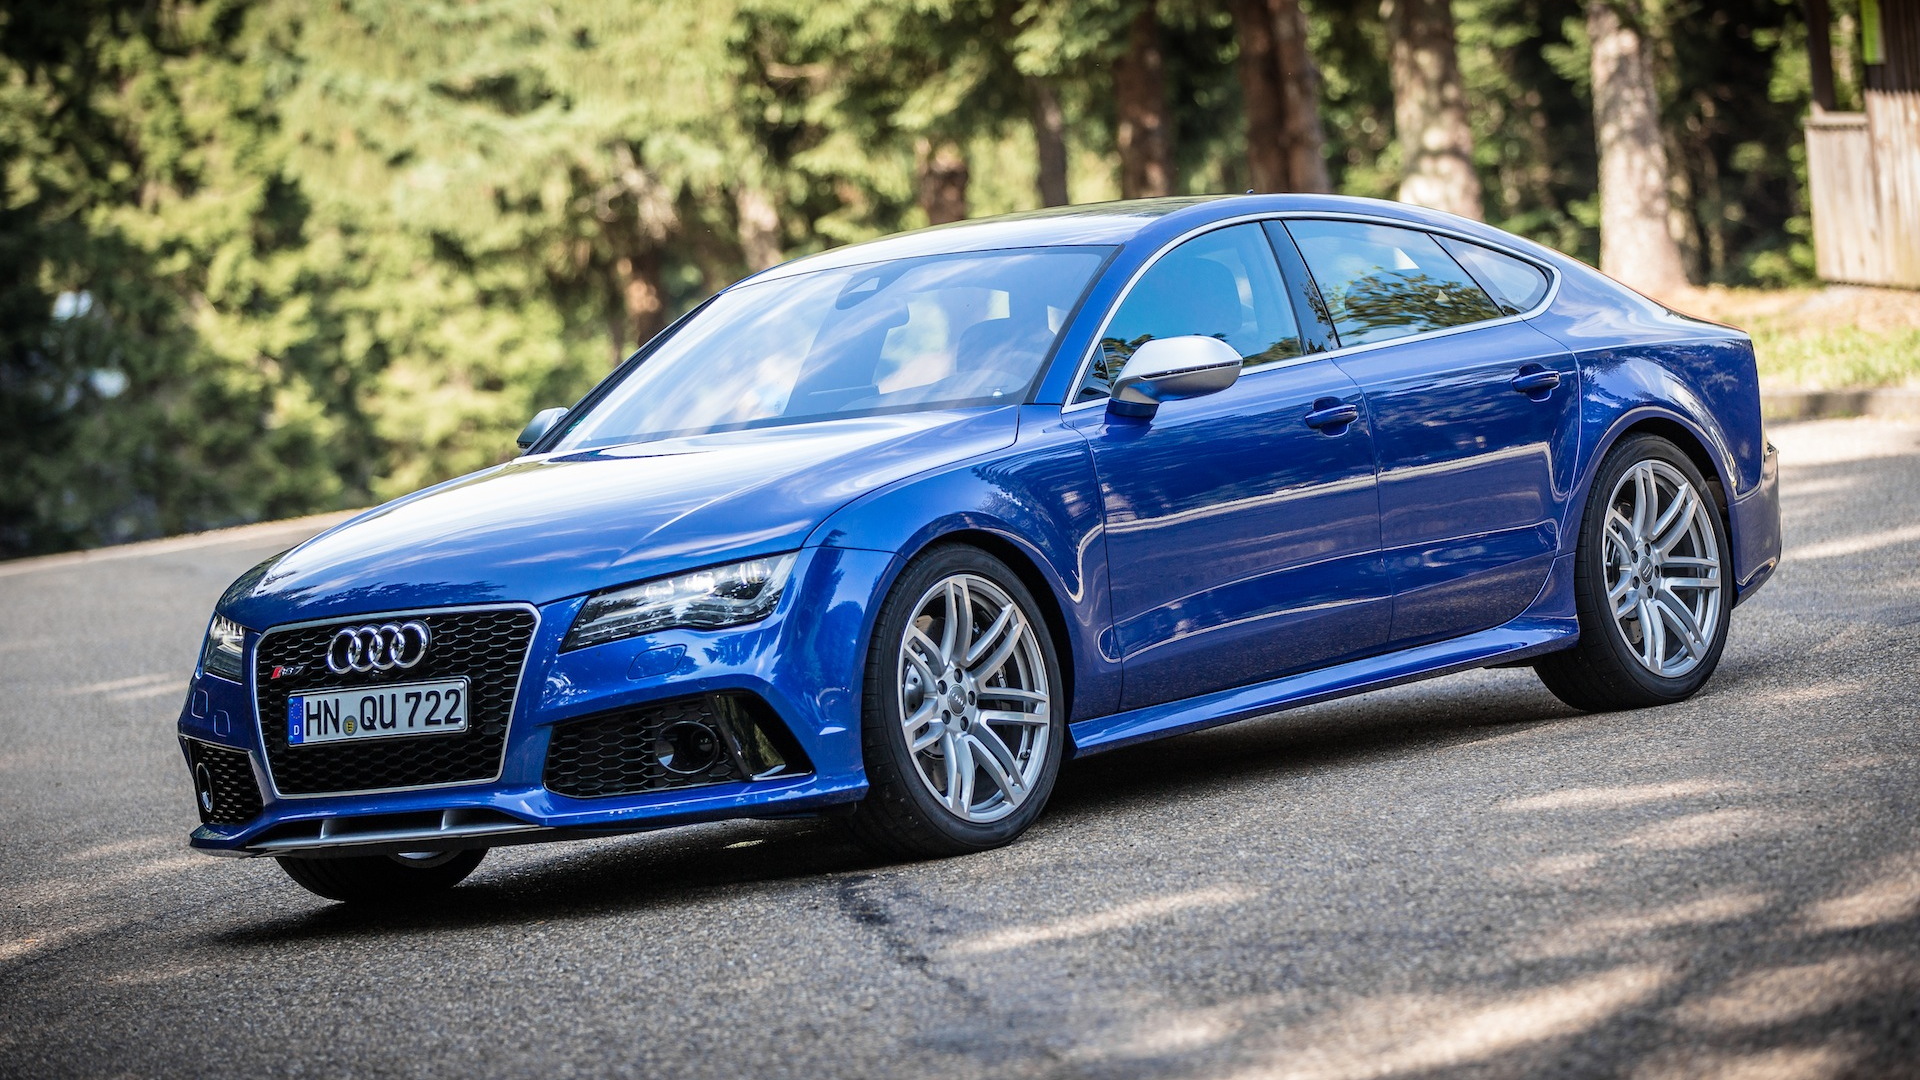 2014 Audi RS 7, First Drive